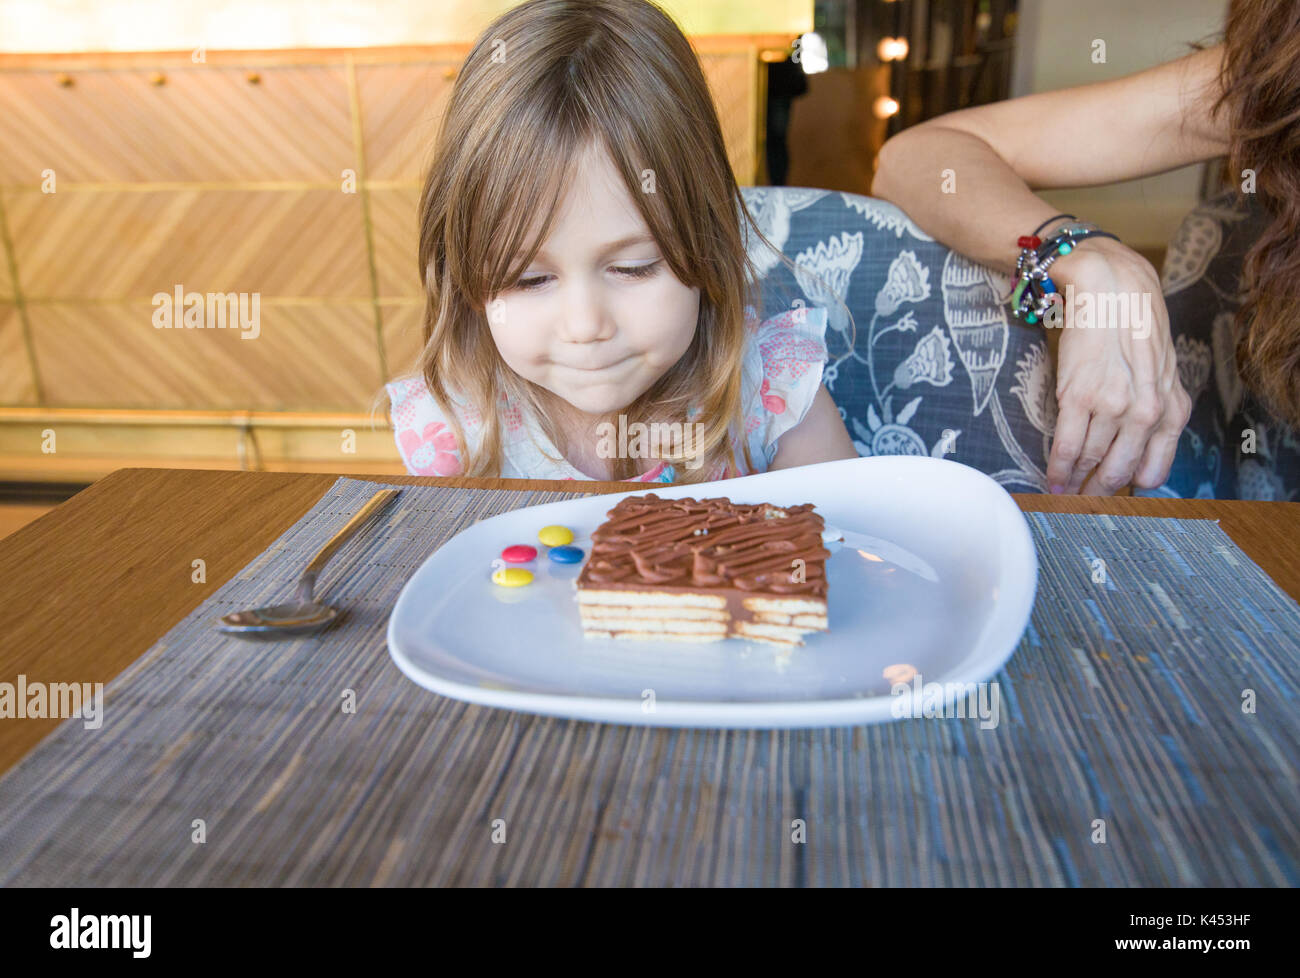 three years old child looking portion of chocolate cake and candy colorful pills in white dish sitting next to woman in restaurant Stock Photo